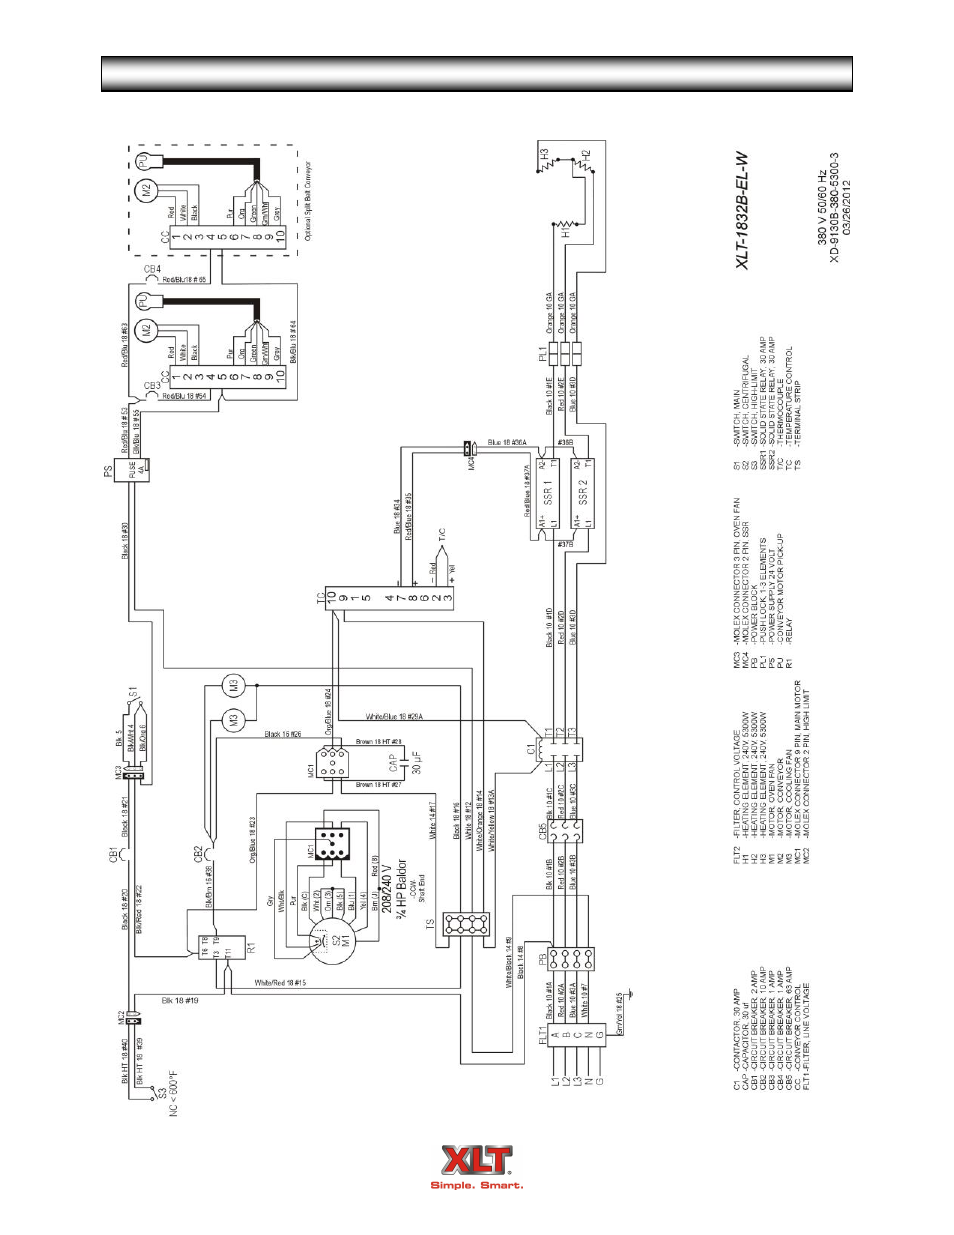 Oven schematic - world | XLT XD-9005A User Manual | Page 89 / 100